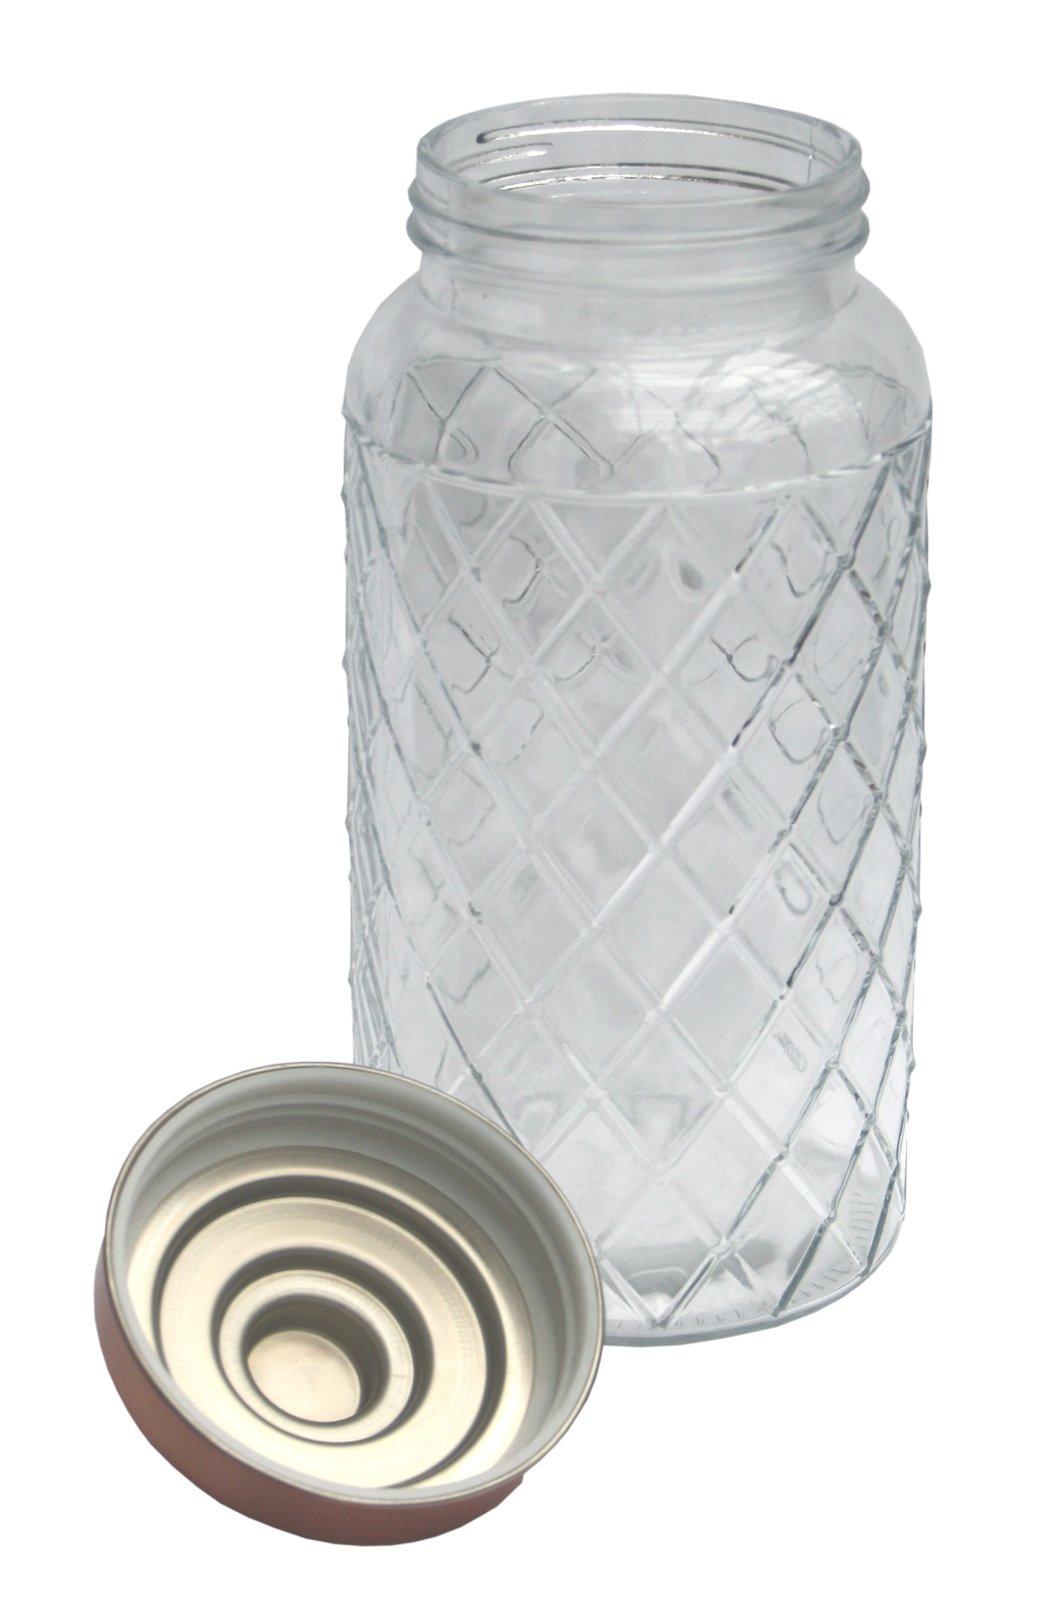 View Round Glass Jar With Copper Lid 95 Inch information